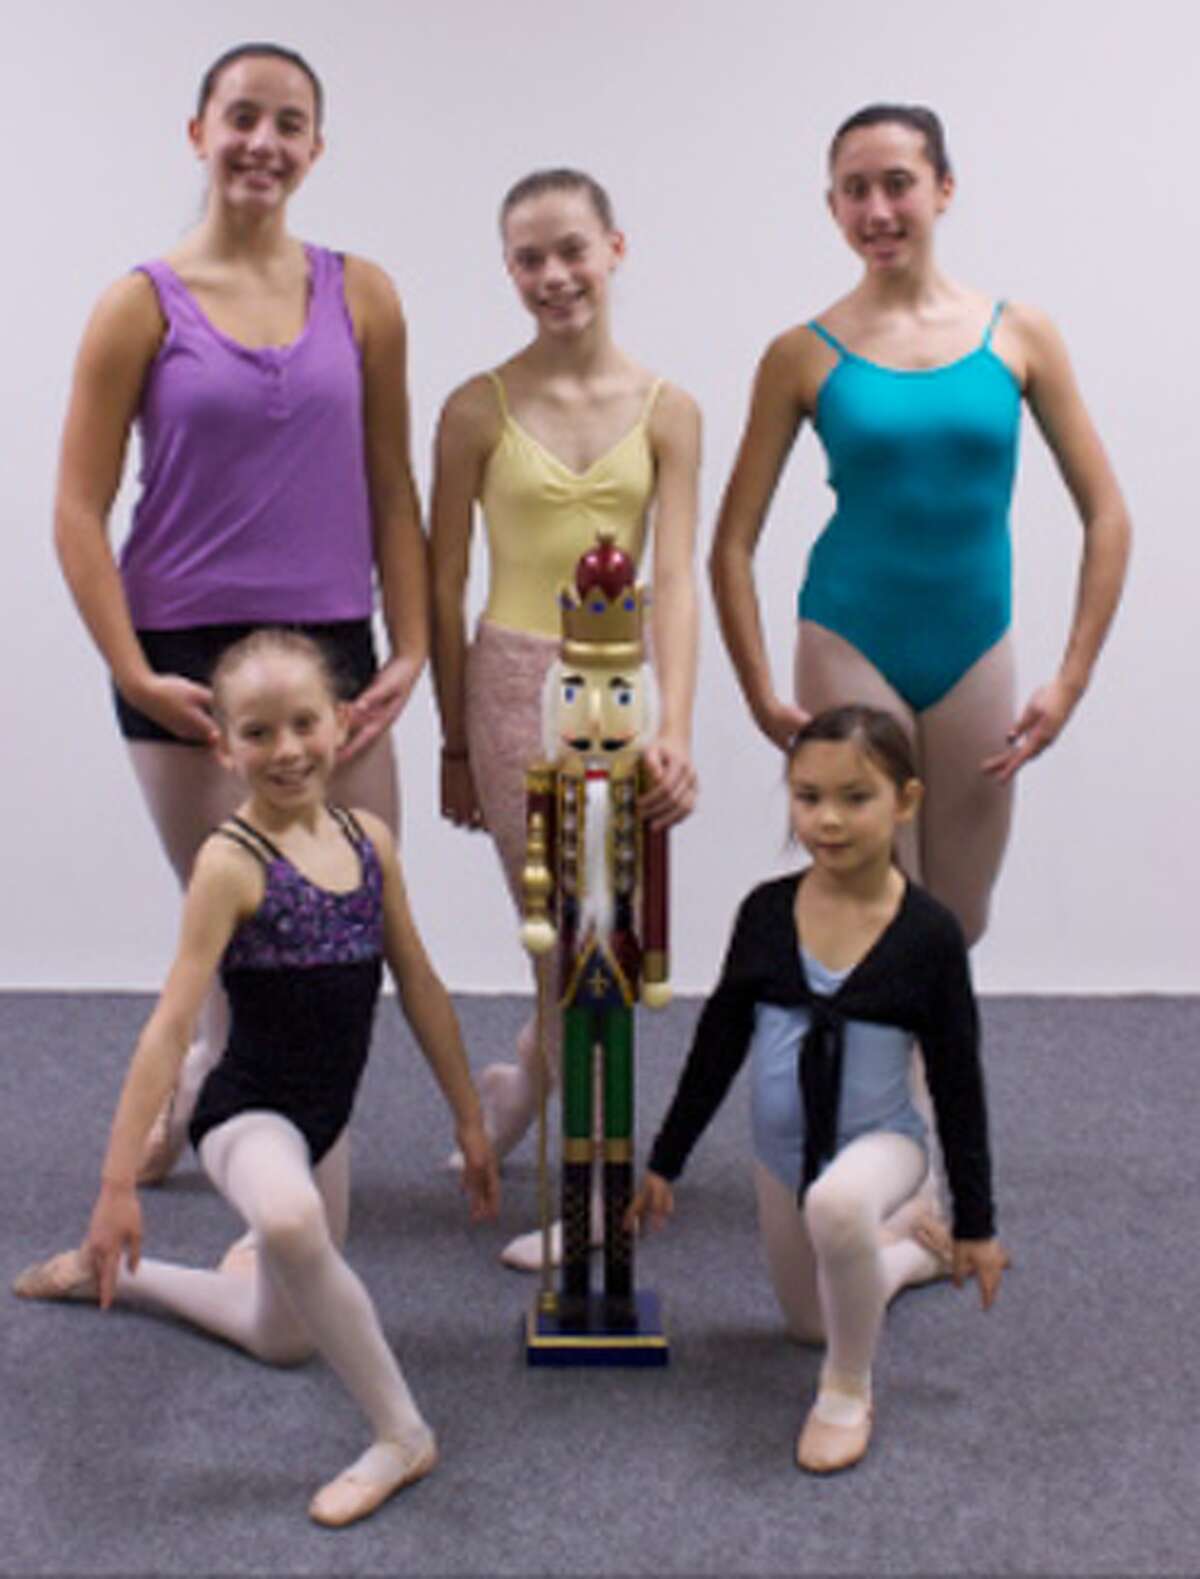 Shelton students performing in “A Winter Ballet” are, from left, front: Samantha Randall and Olivia Kish; in back: Courtney Sissick, Kiara Christian and Alexa Toohey.